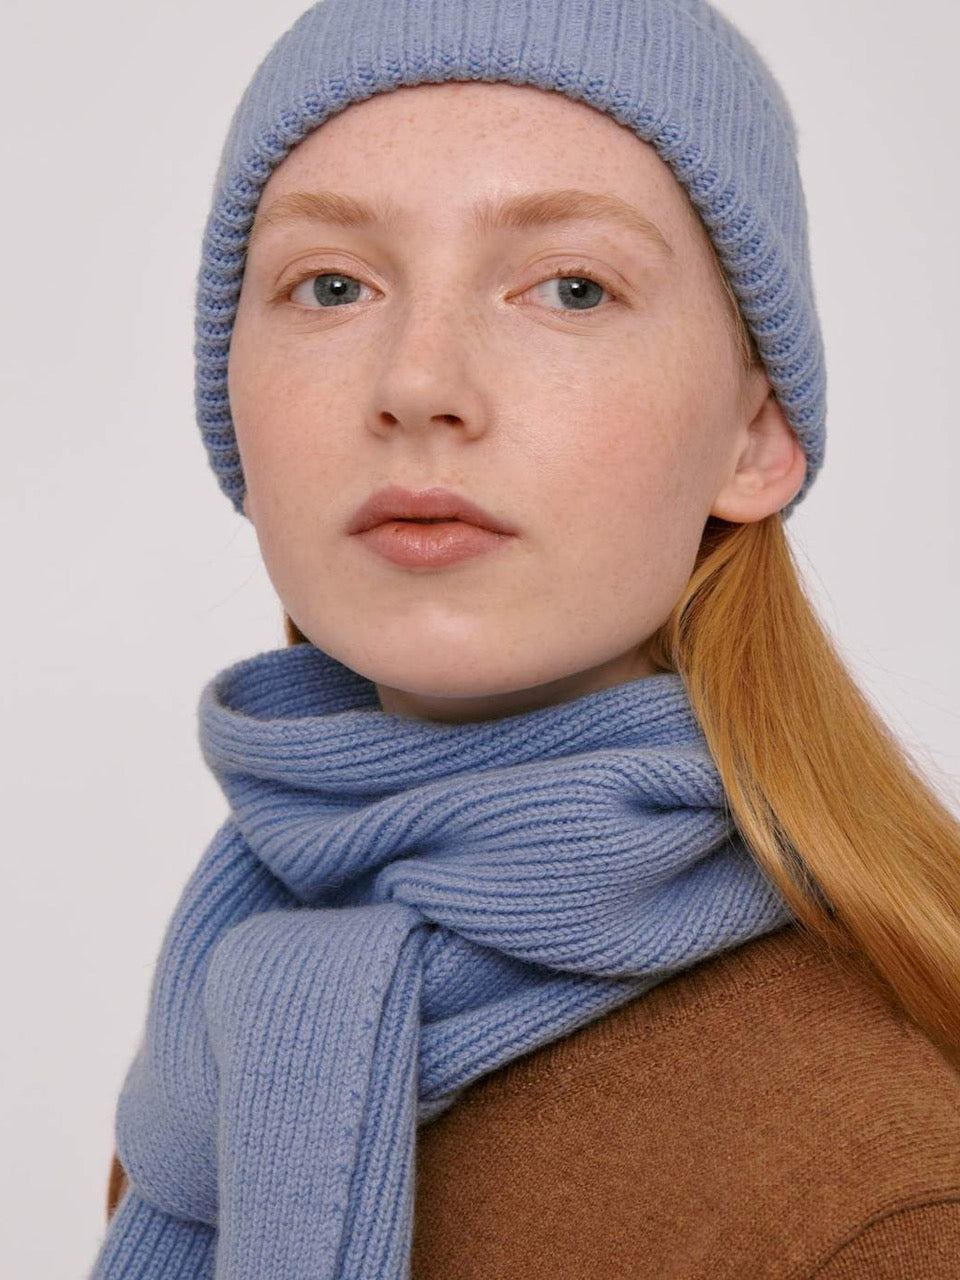 A woman wearing an Organic Basics Recycled Wool Scarf - Light Blue and a blue knitted hat.